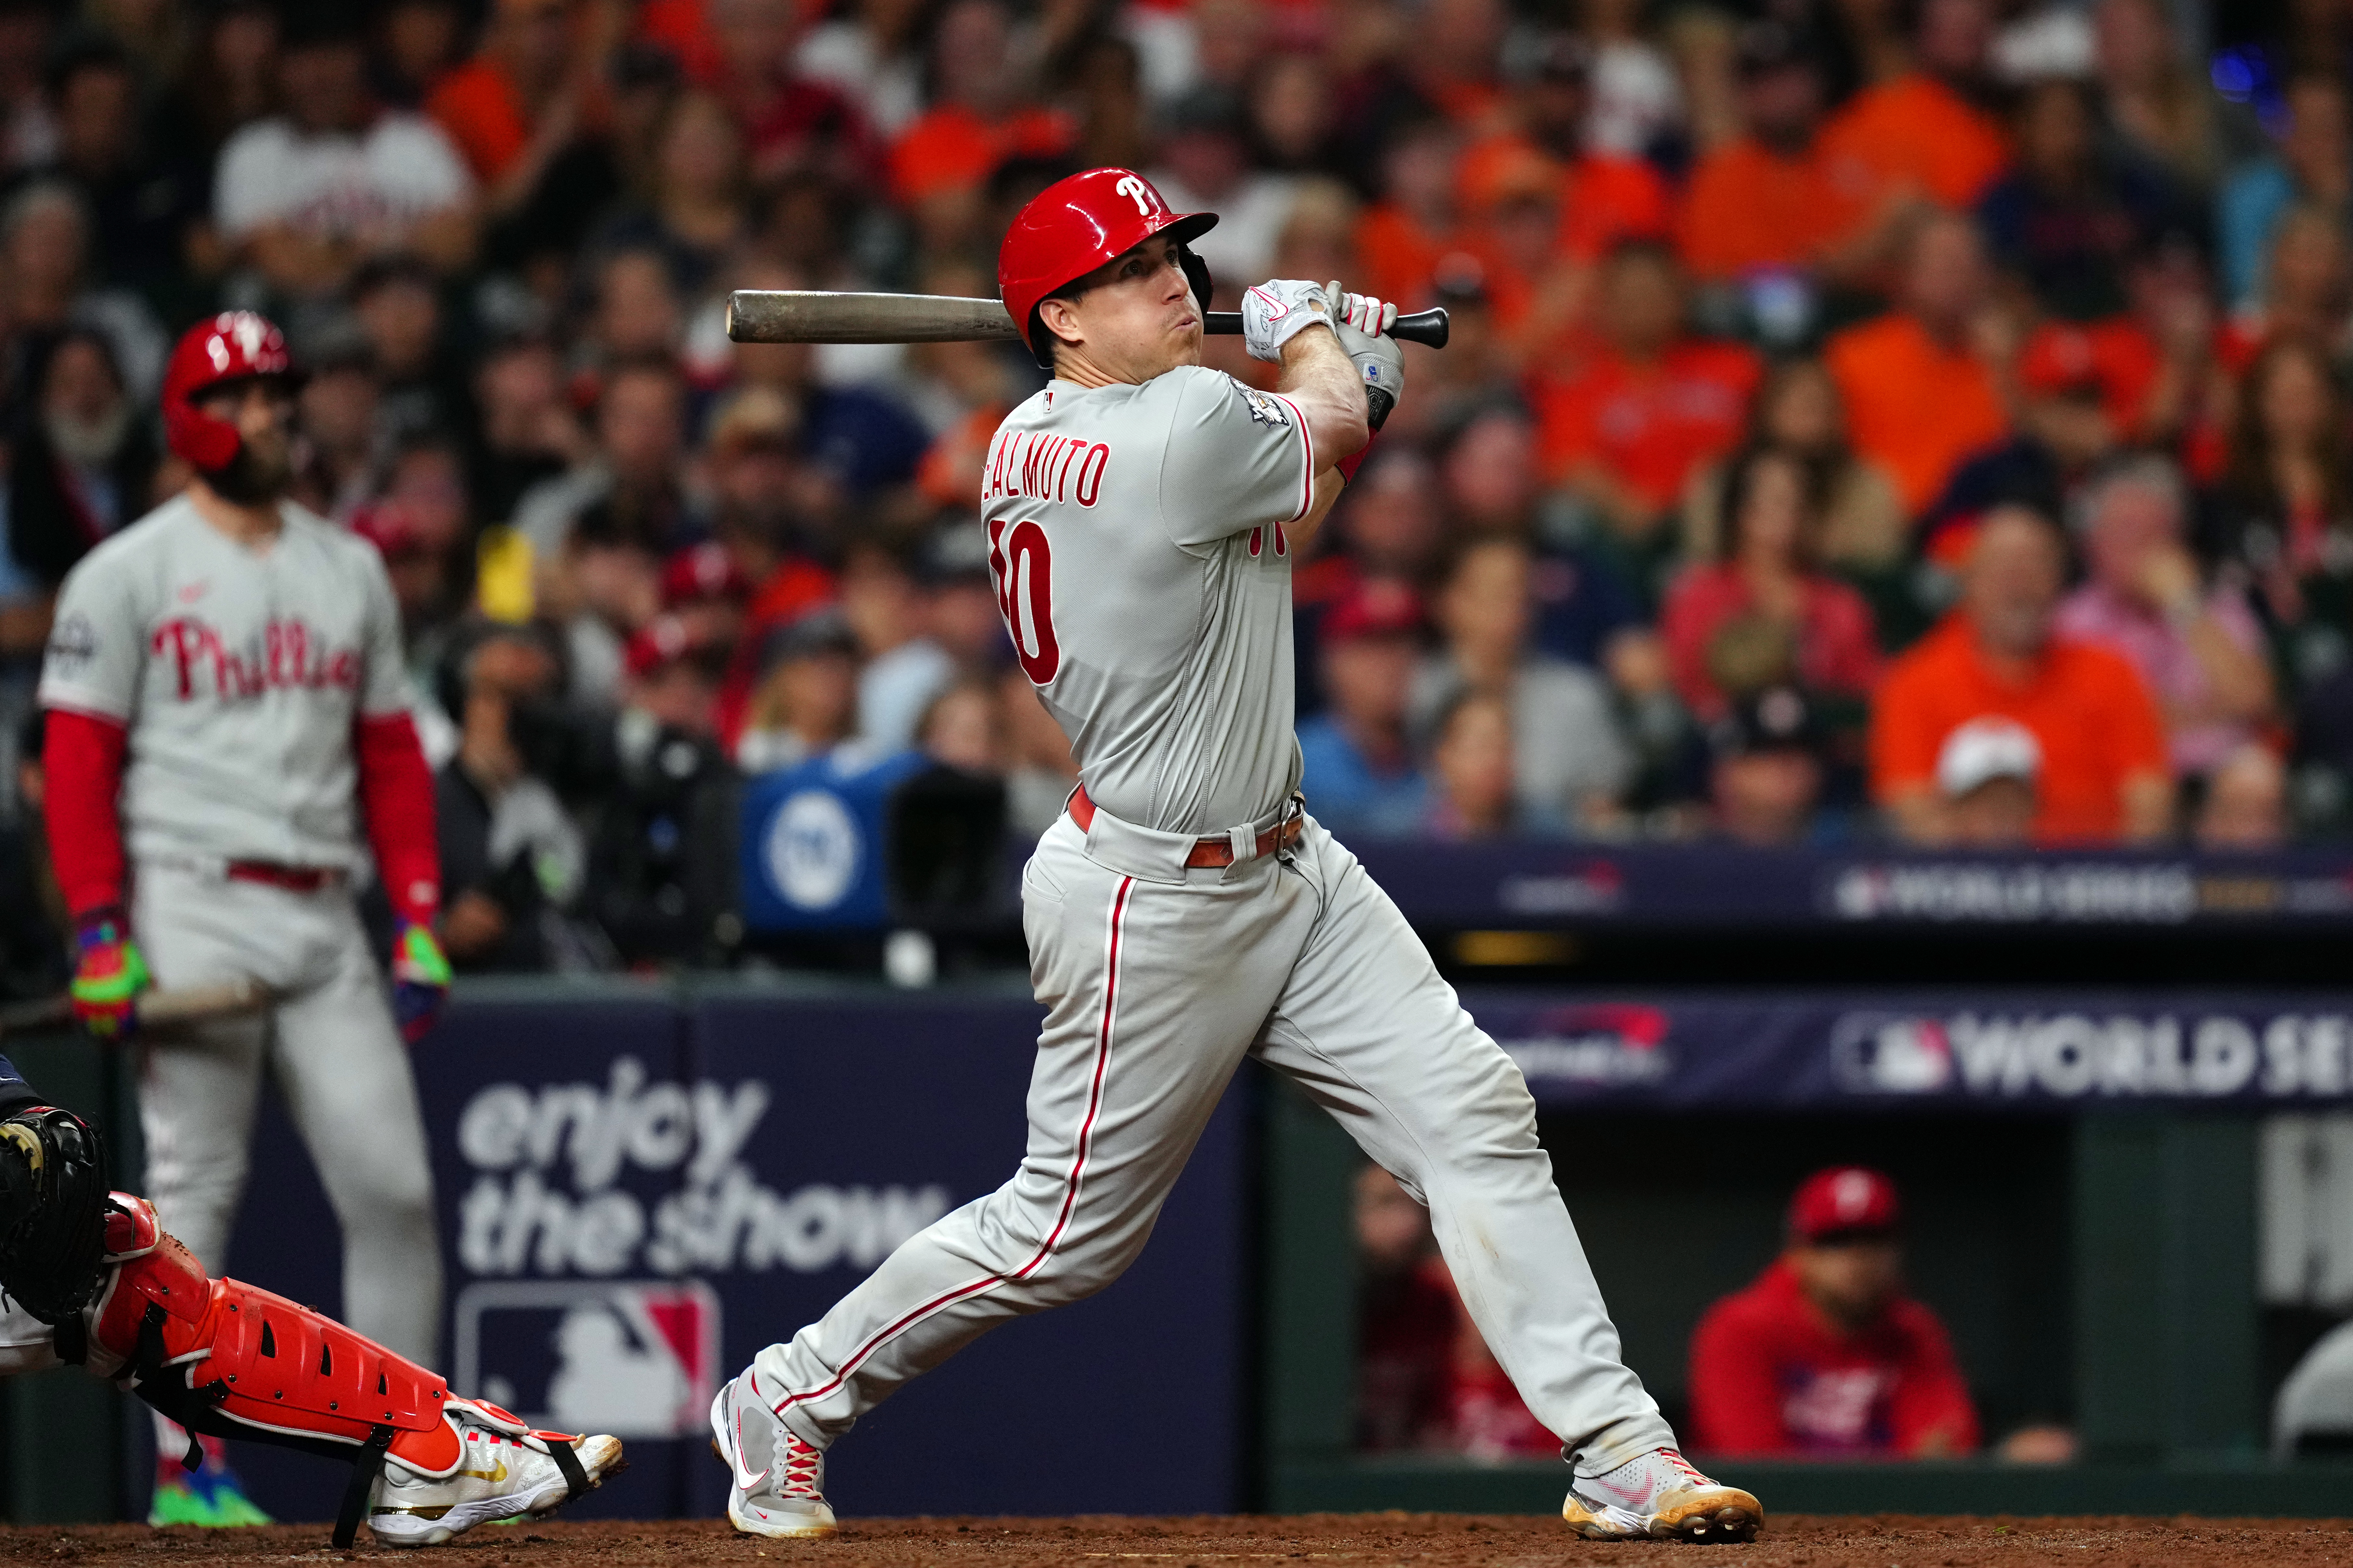 J.T. Realmuto of the Philadelphia Phillies hits a single home run during the 10th inning in Game 1 of the MLB World Series against the Houston Astros at Minute Maid Park in Houston, Texas, October 28, 2022. /CFP